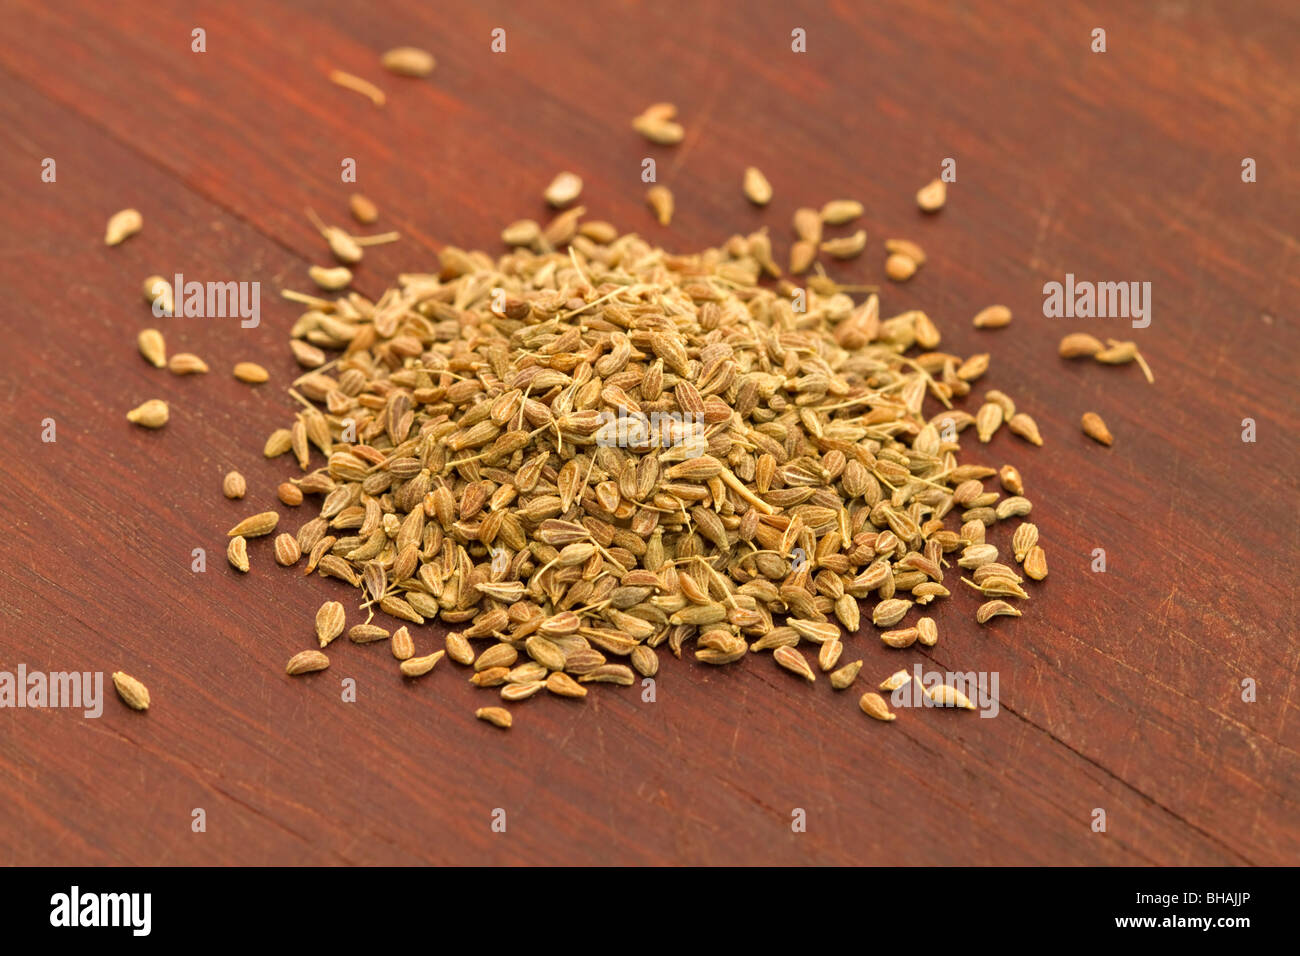 Anise seed Stock Photo